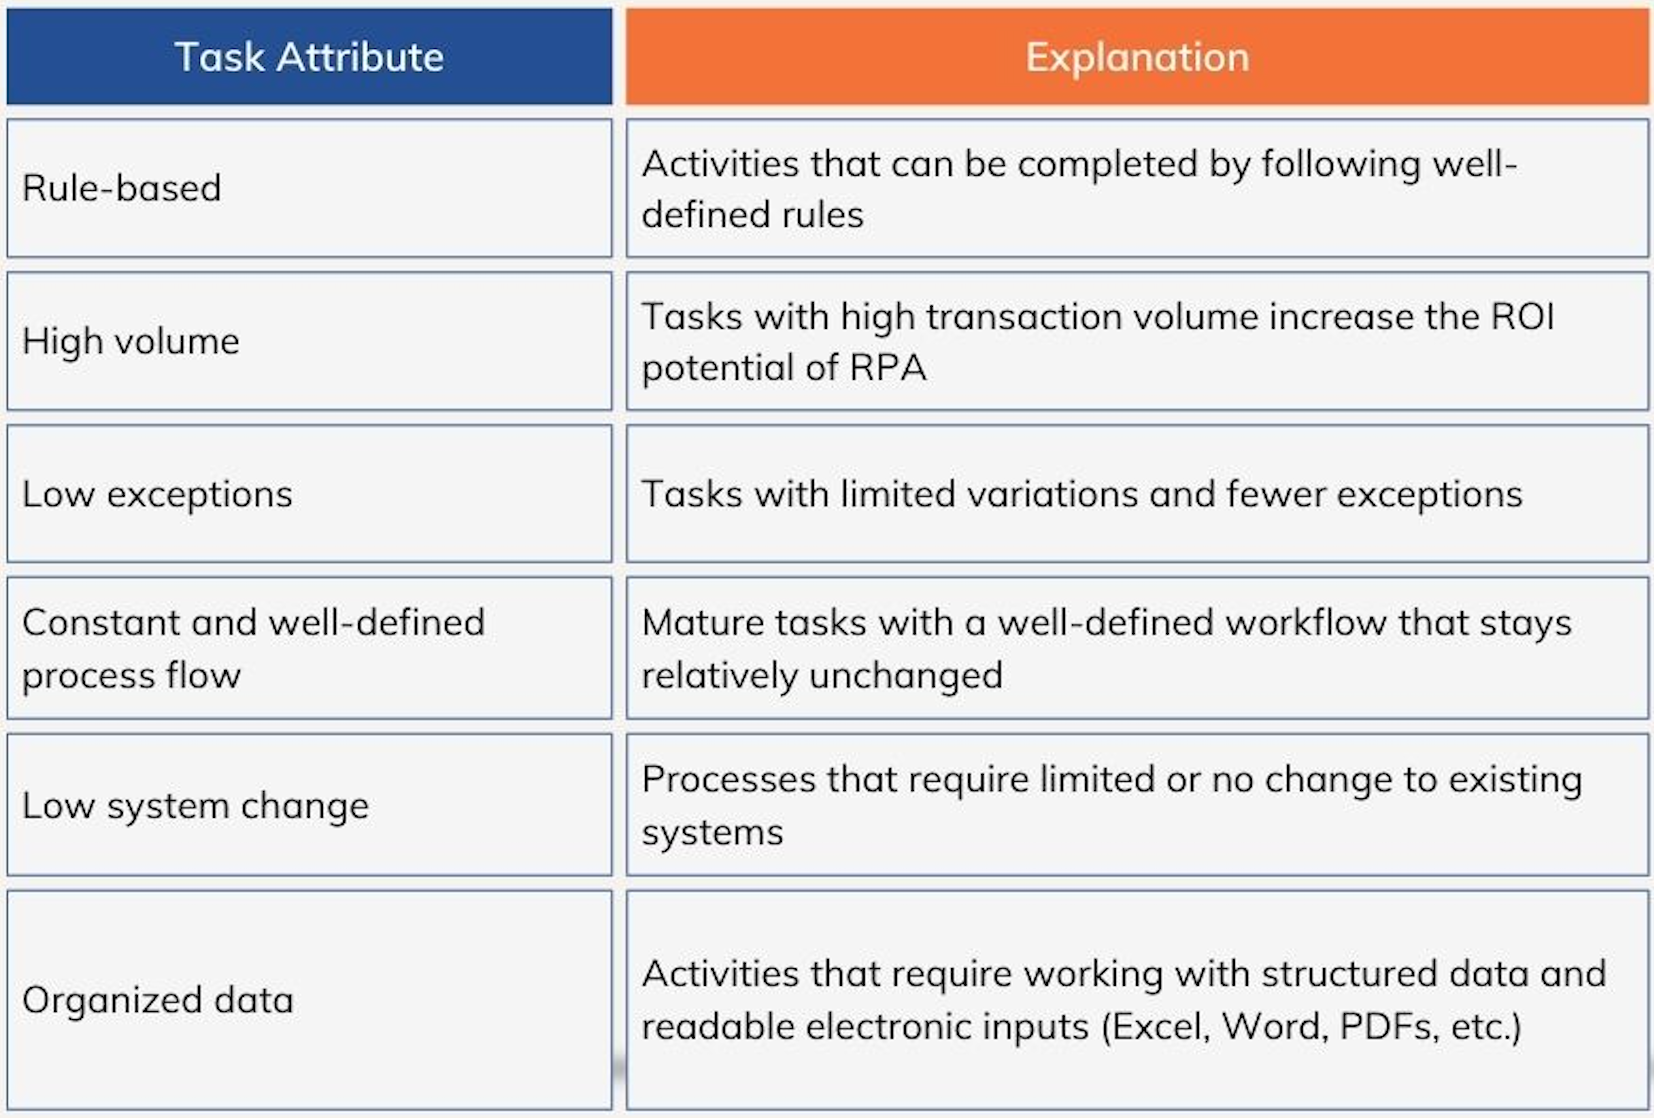 List of attributes that make a task or activity likely to benefit from automation in manufacturing